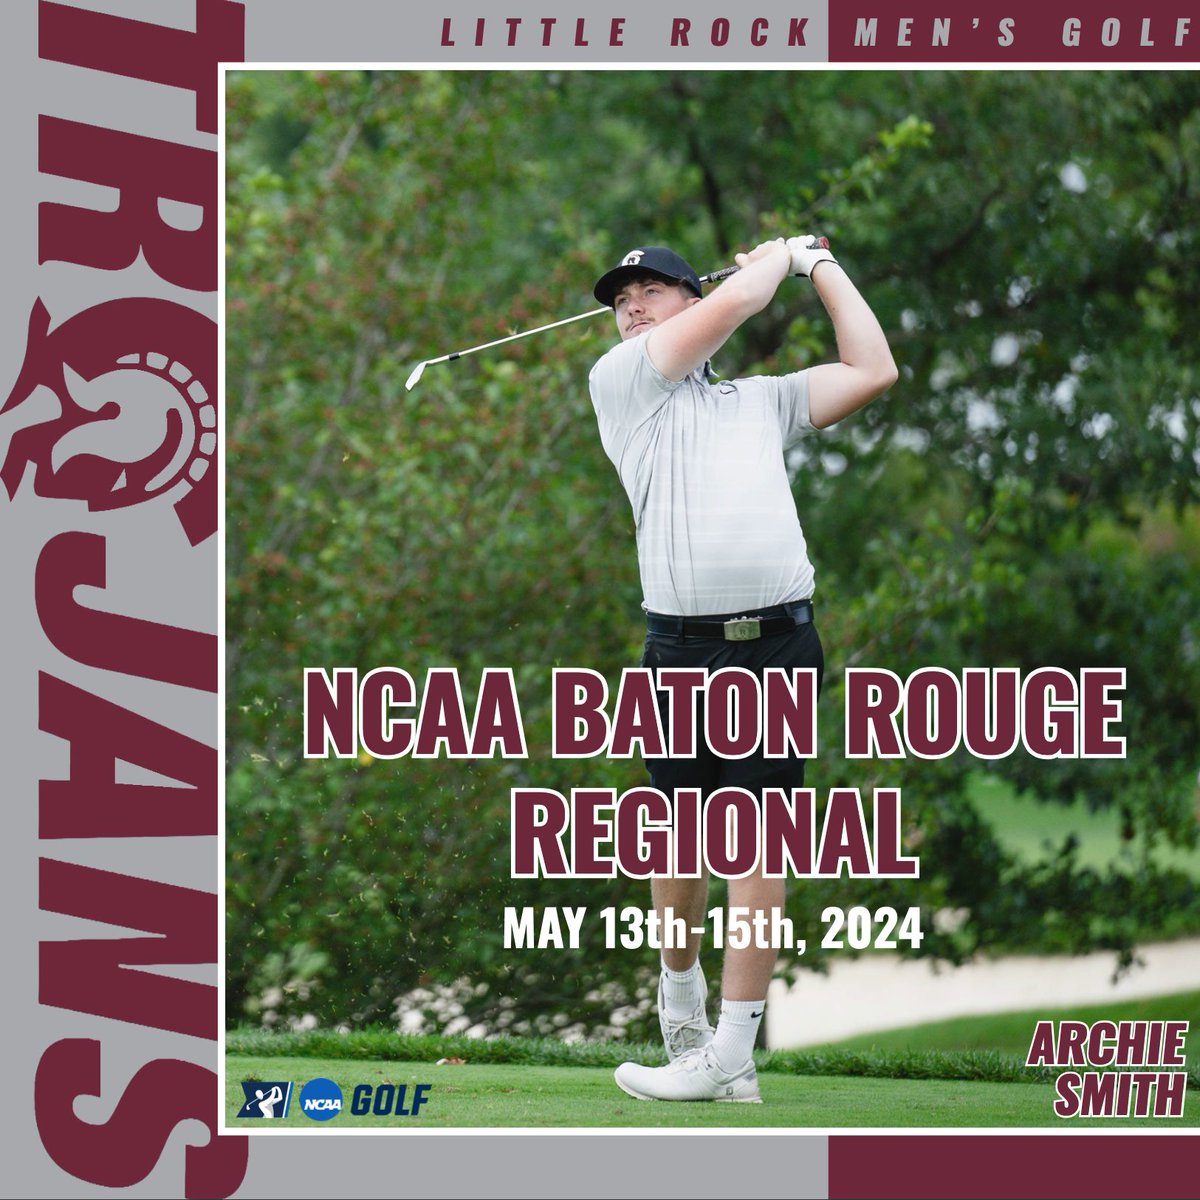 HE IS IN! Baton Rouge Bound for Archie Smith!

#LittleRocksTeam #NCAAGolf